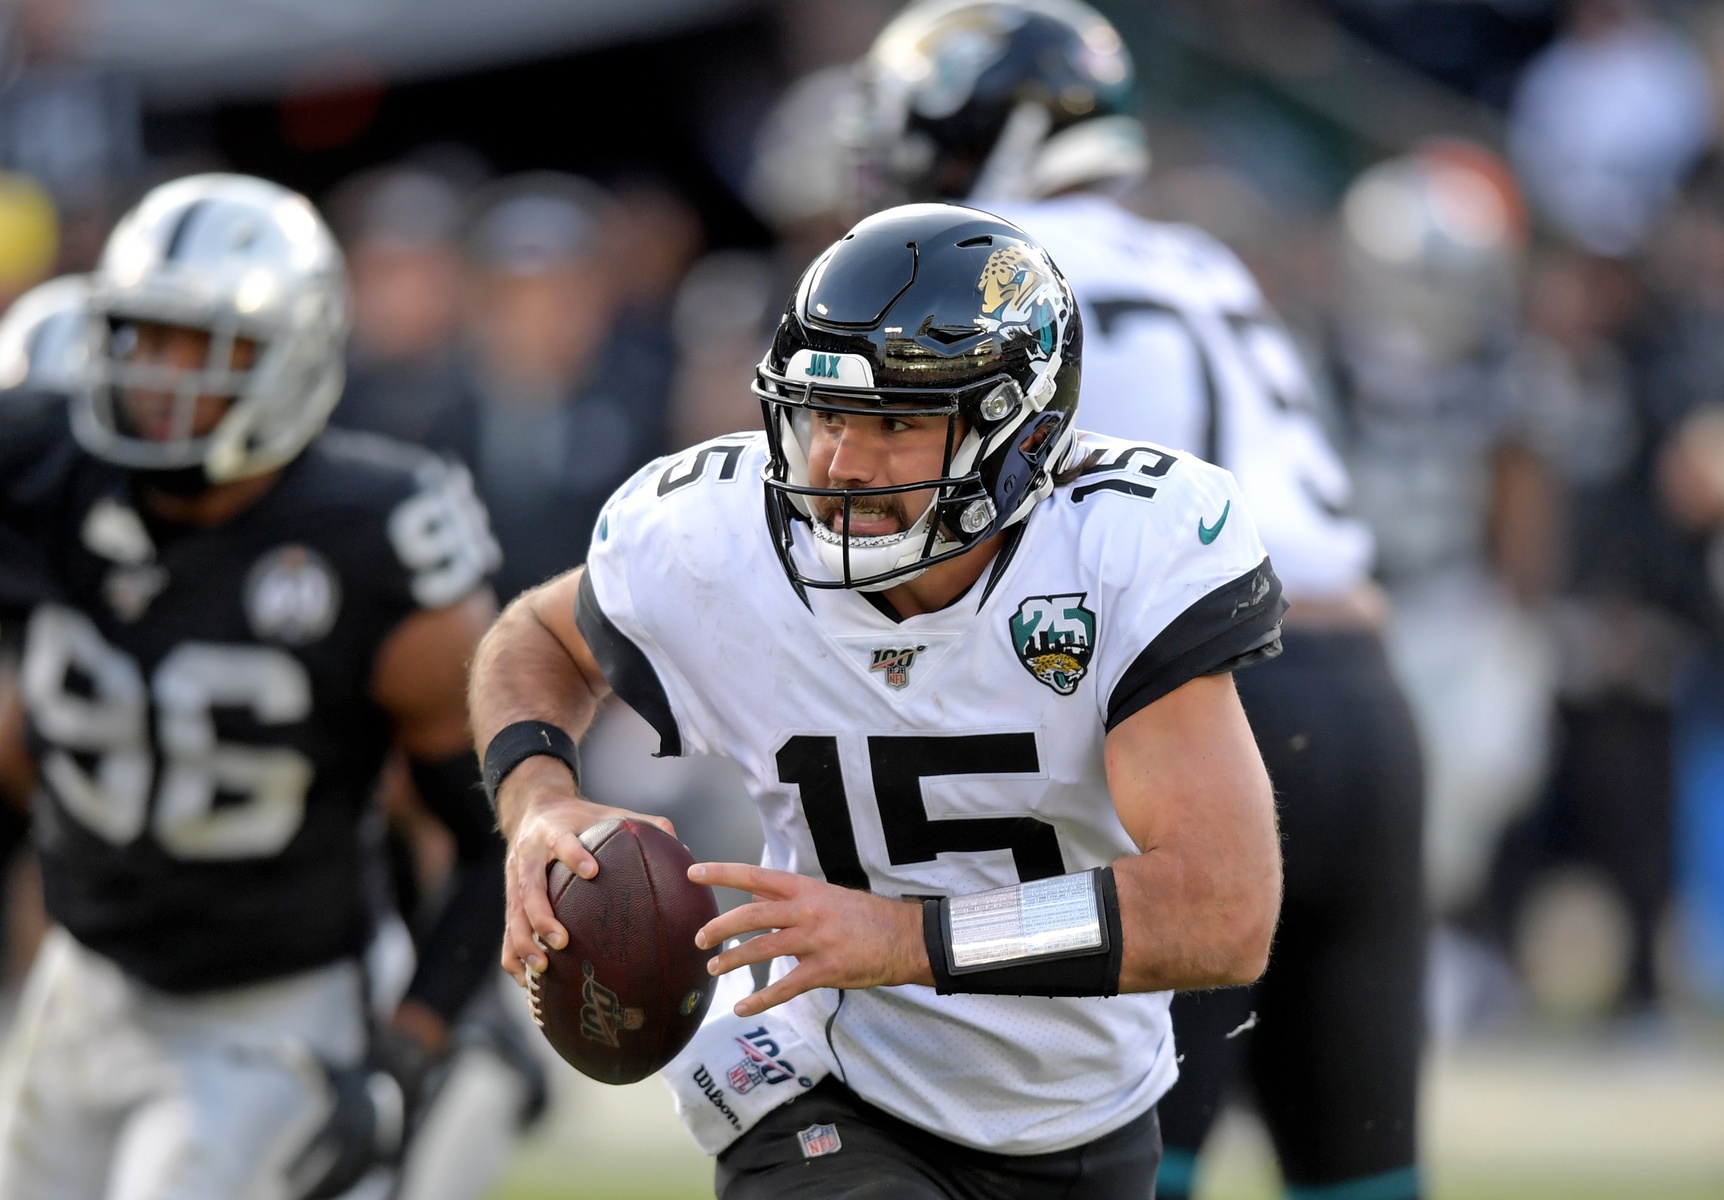 New Las Vegas Raiders quarterback Gardner Minshew (15) and the Jacksonville Jaguars defeated the Raiders, 20-16, in their final game at the Oakland Coliseum in 2019.